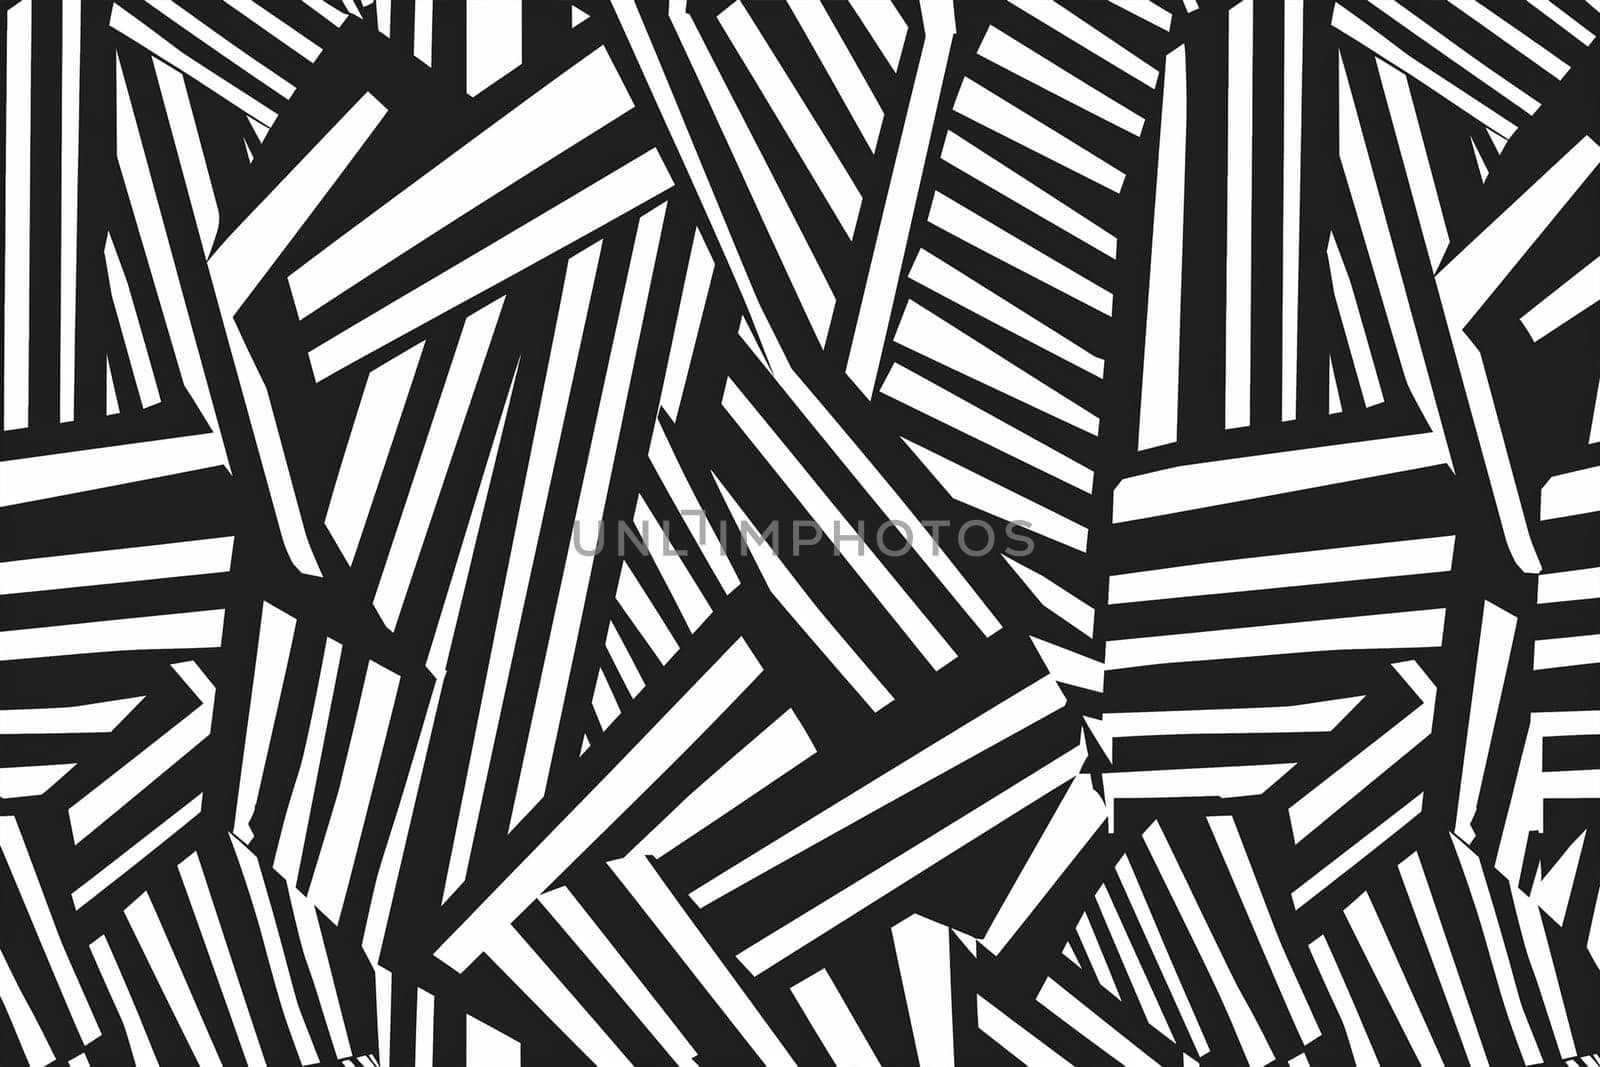 Black and White Abstract Striped Pattern by Sd28DimoN_1976